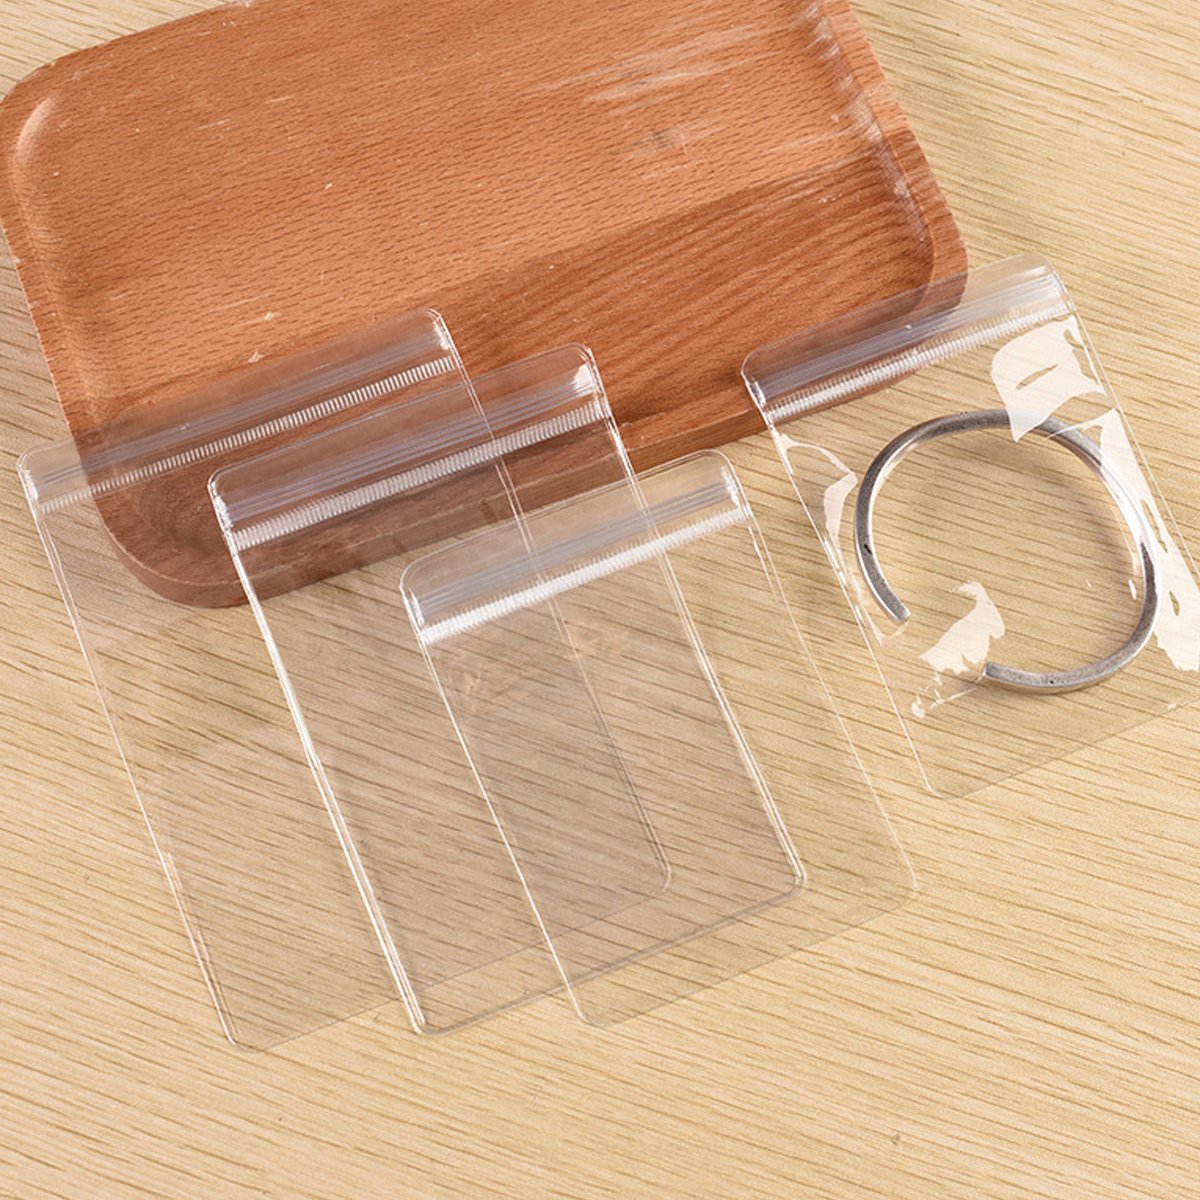 Organize and Protect with PVC Self-Sealing Jewelry Bags